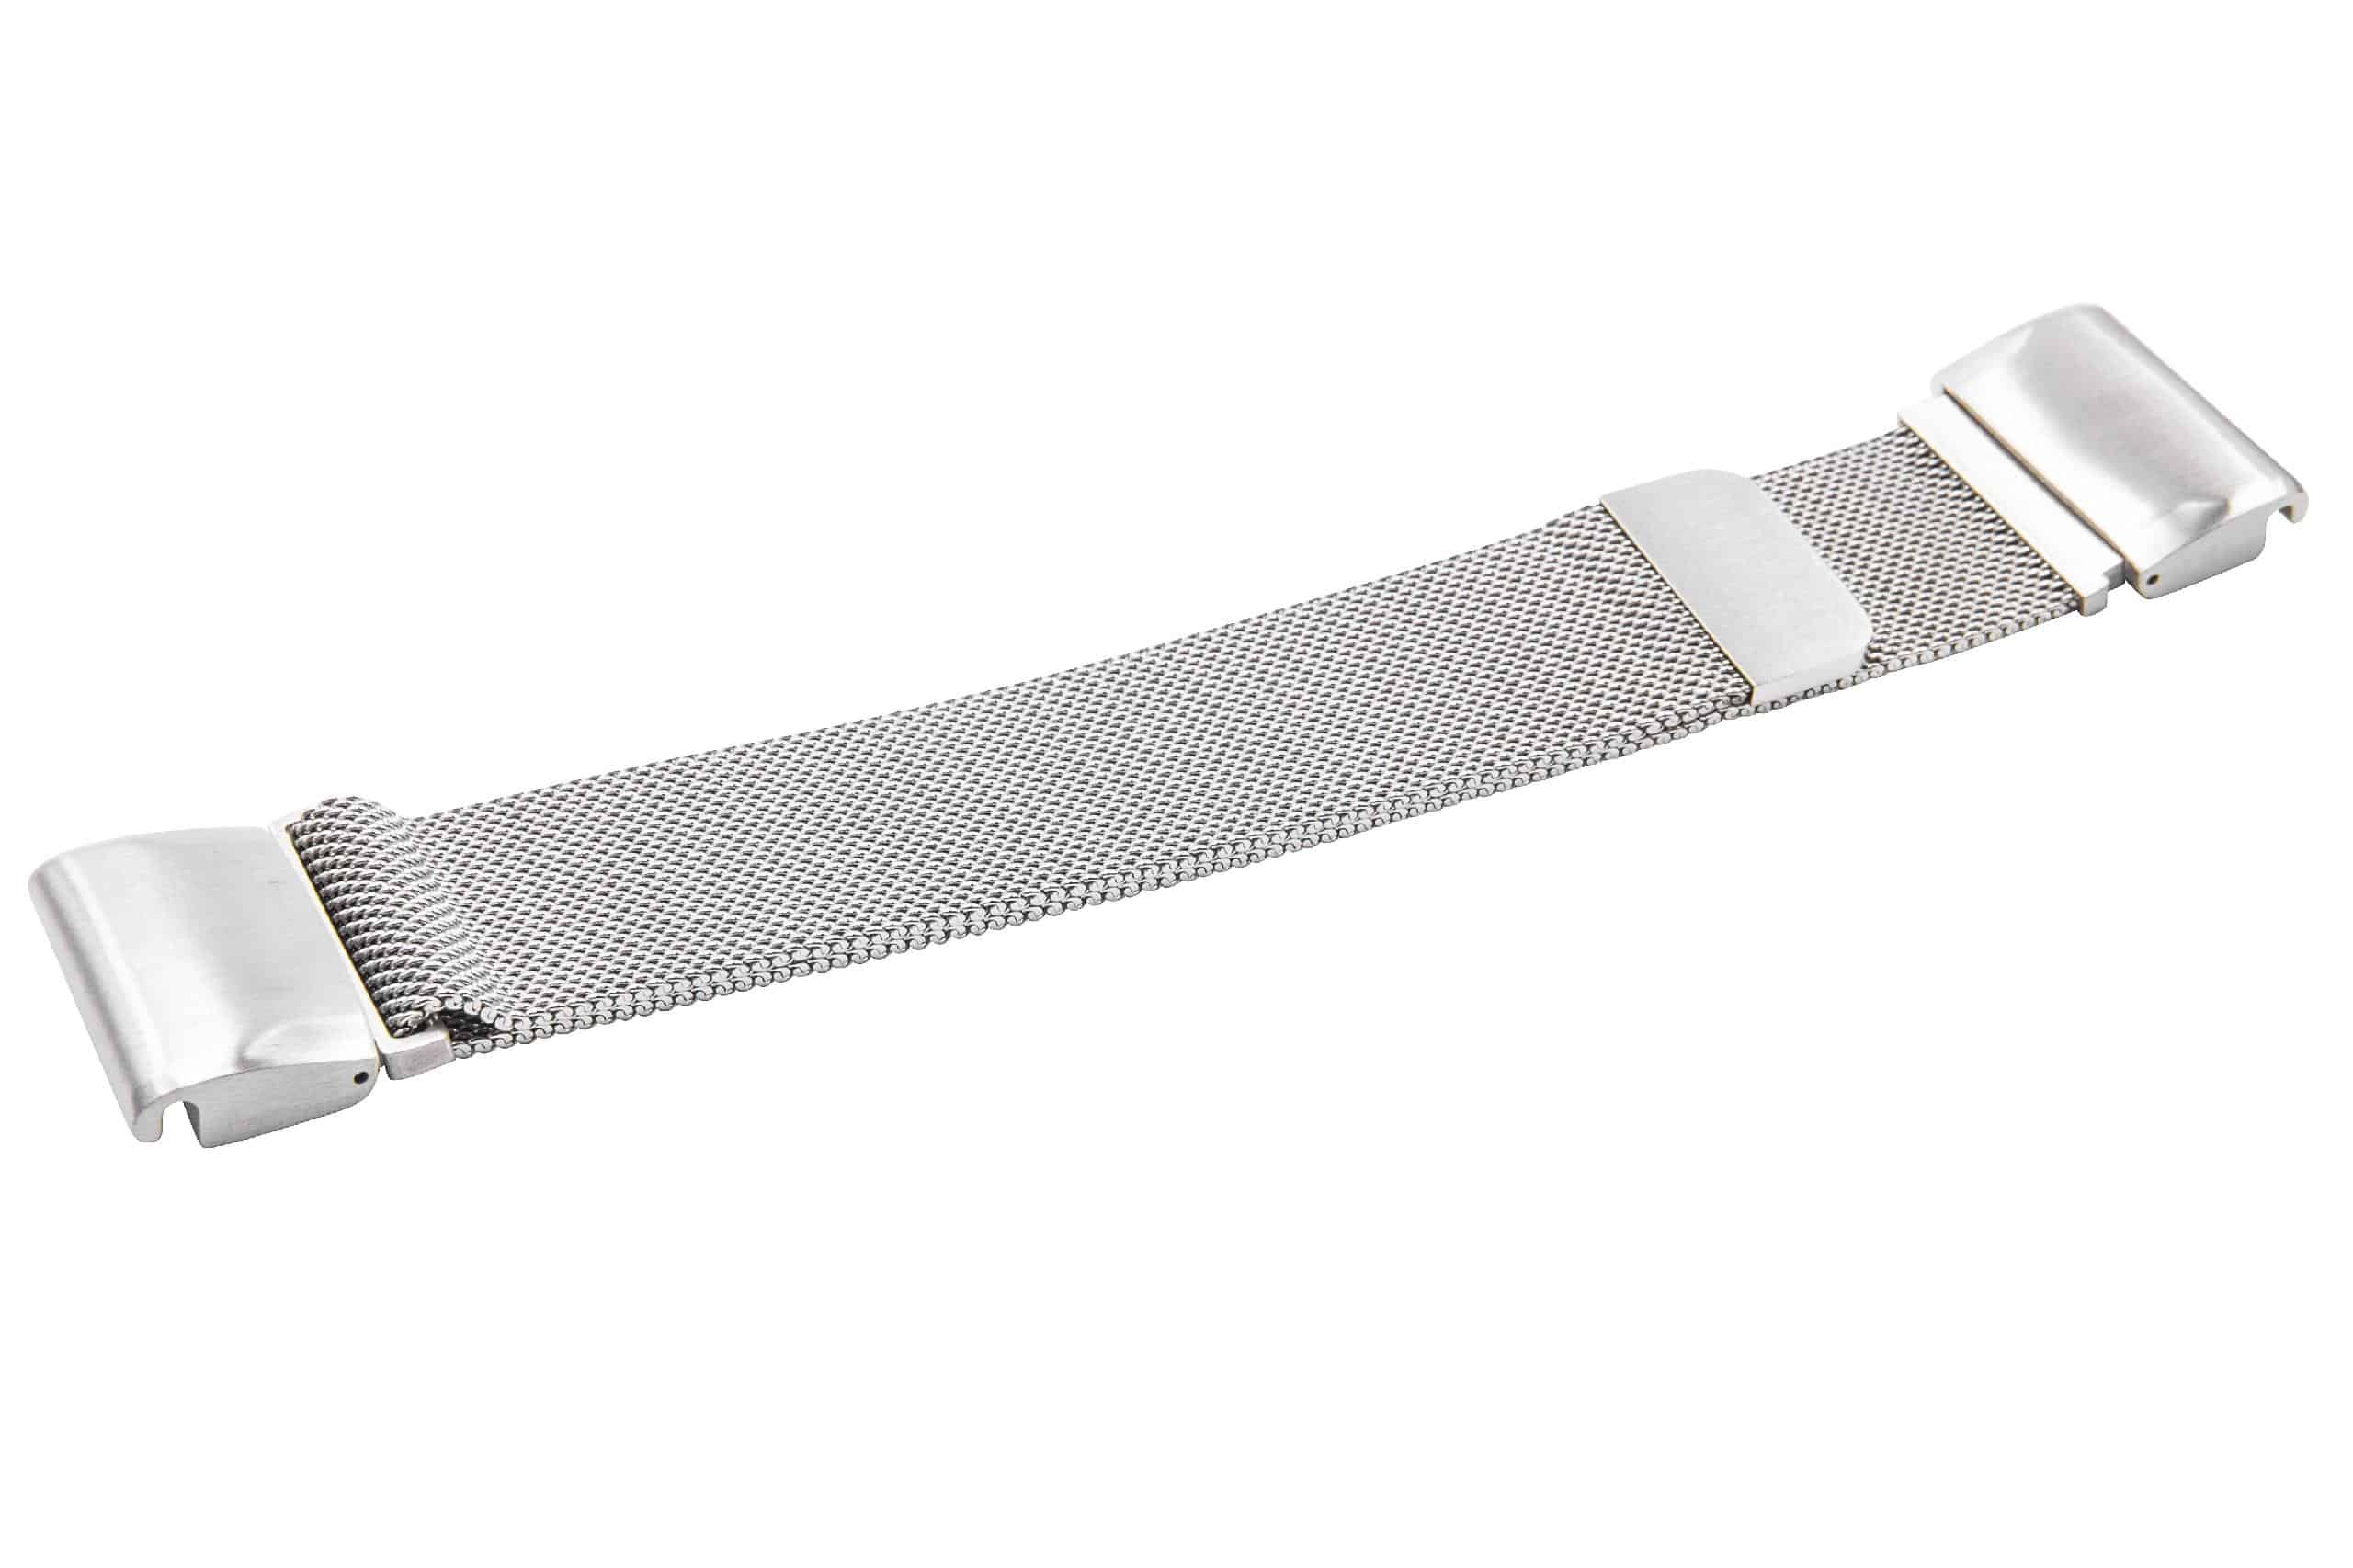 wristband for Garmin Descent Smartwatch etc. - Up to 265 mm wrist circumference, stainless steel, silver